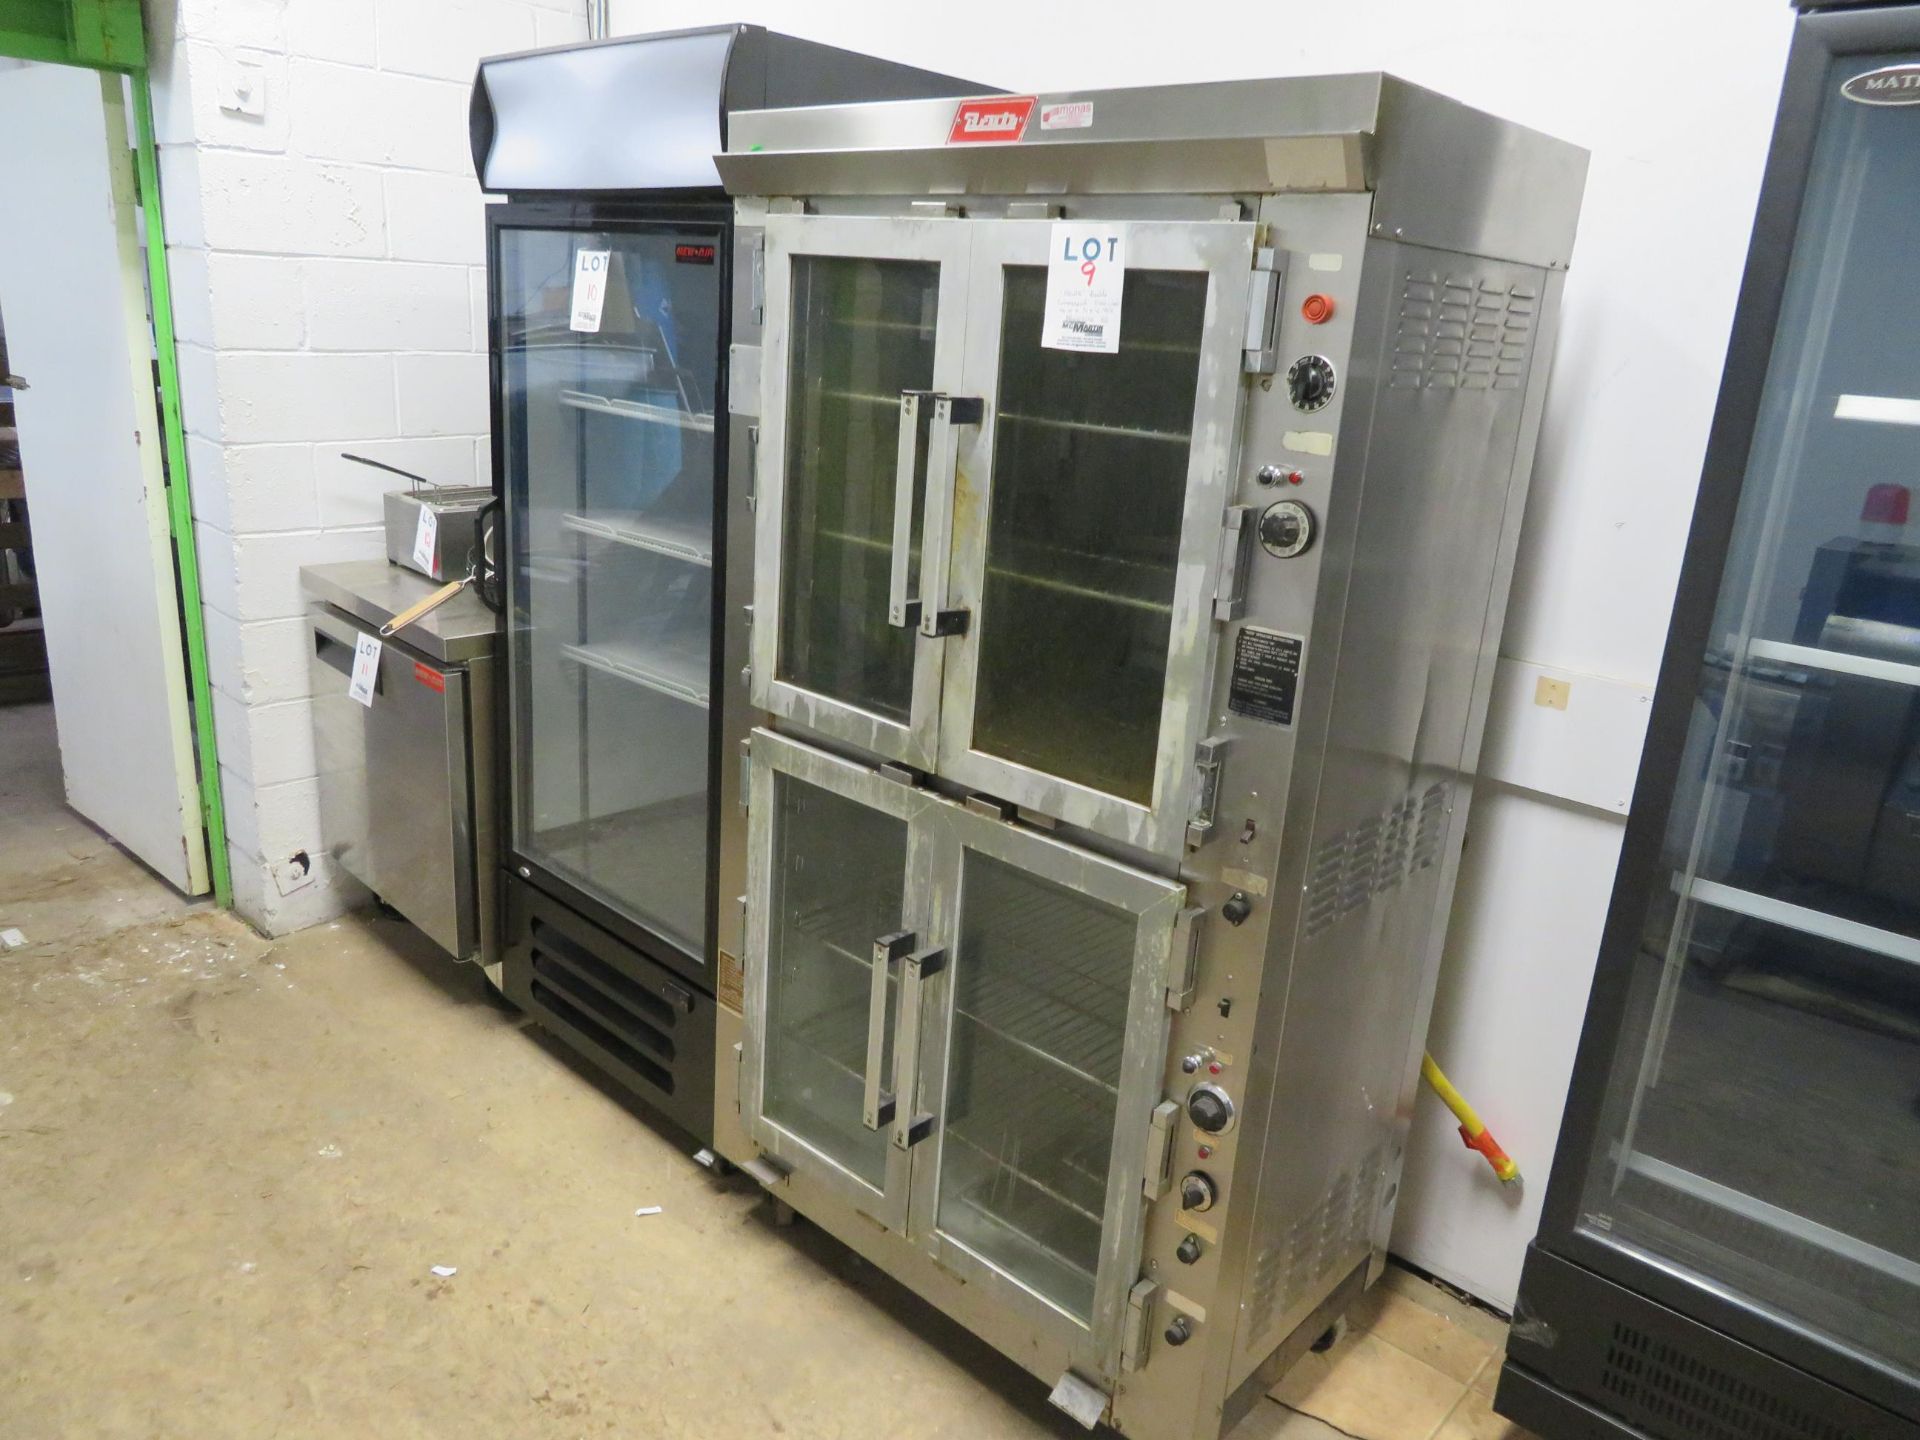 BRUTE double commercial gas oven on wheels approx. 40"w x 31"d x 74"h